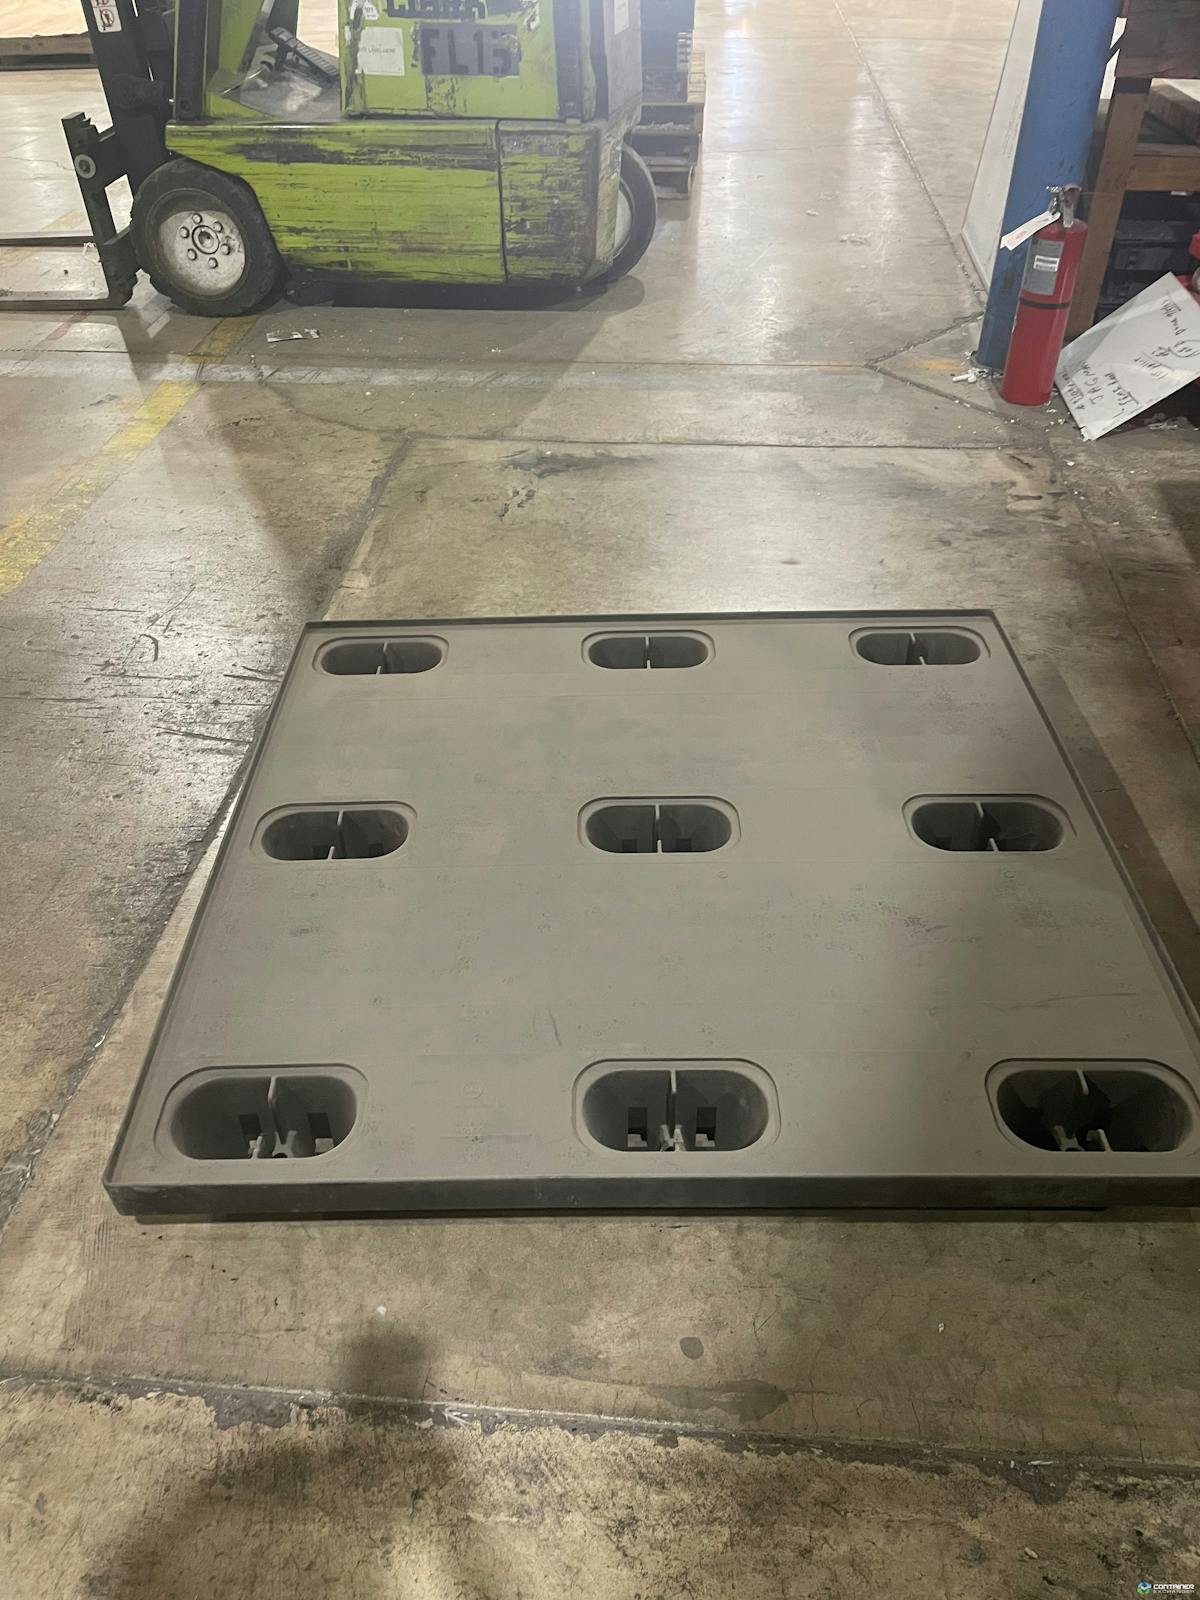 Plastic Pallets For Sale: Refurbished 48x45x5 Black Plastic Nestable Pallets Indiana In Indiana - image 1